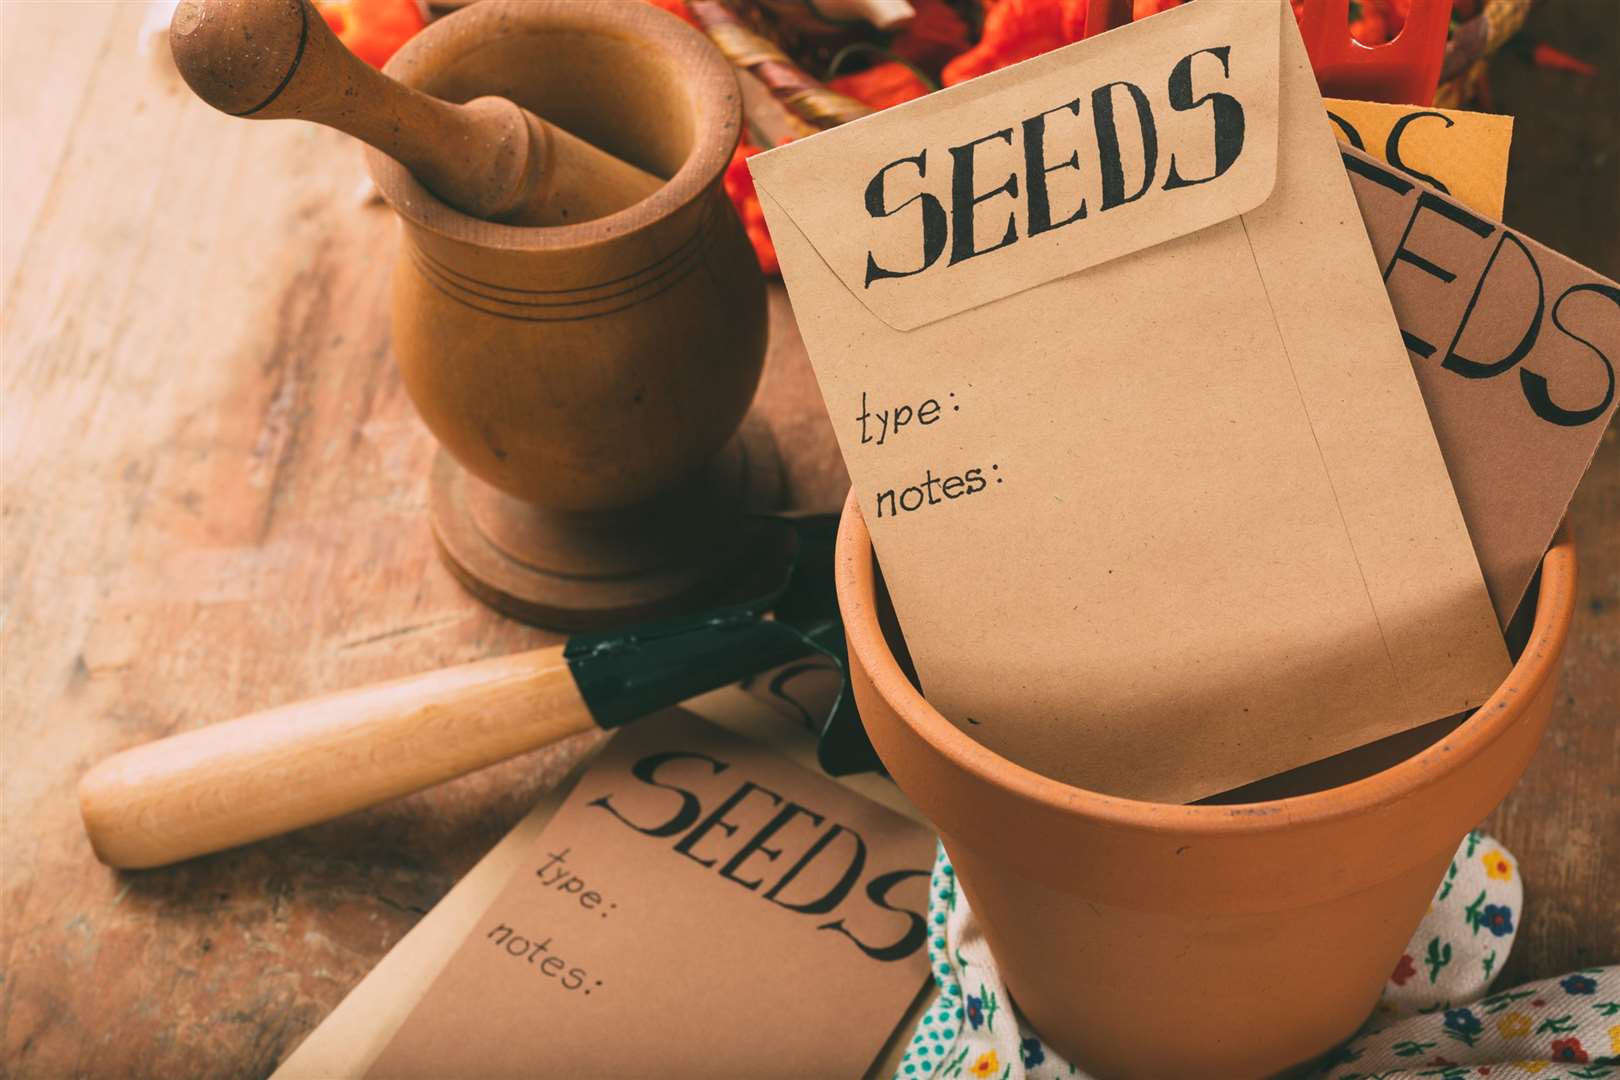 Collect your own seeds and put them in envelopes to plant in the spring. Picture: iStock/PA